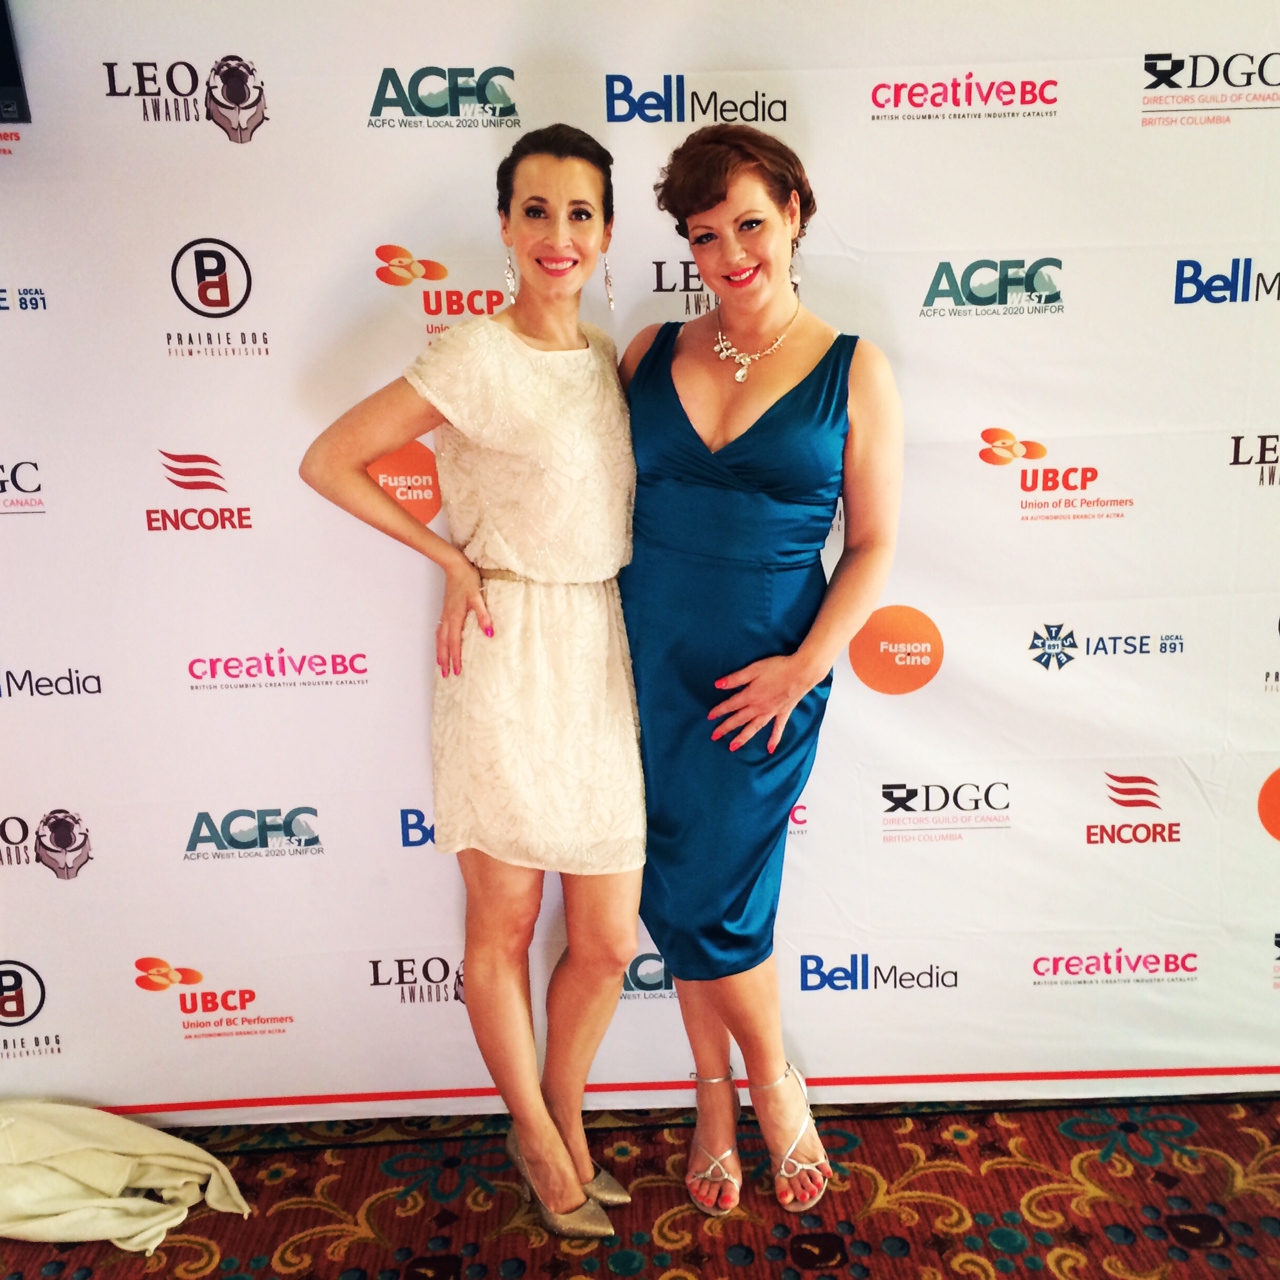 With Leo nominee Jill Morrison of 'Package Deal' and 'When Calls the Heart' at the 2014 Leo Awards